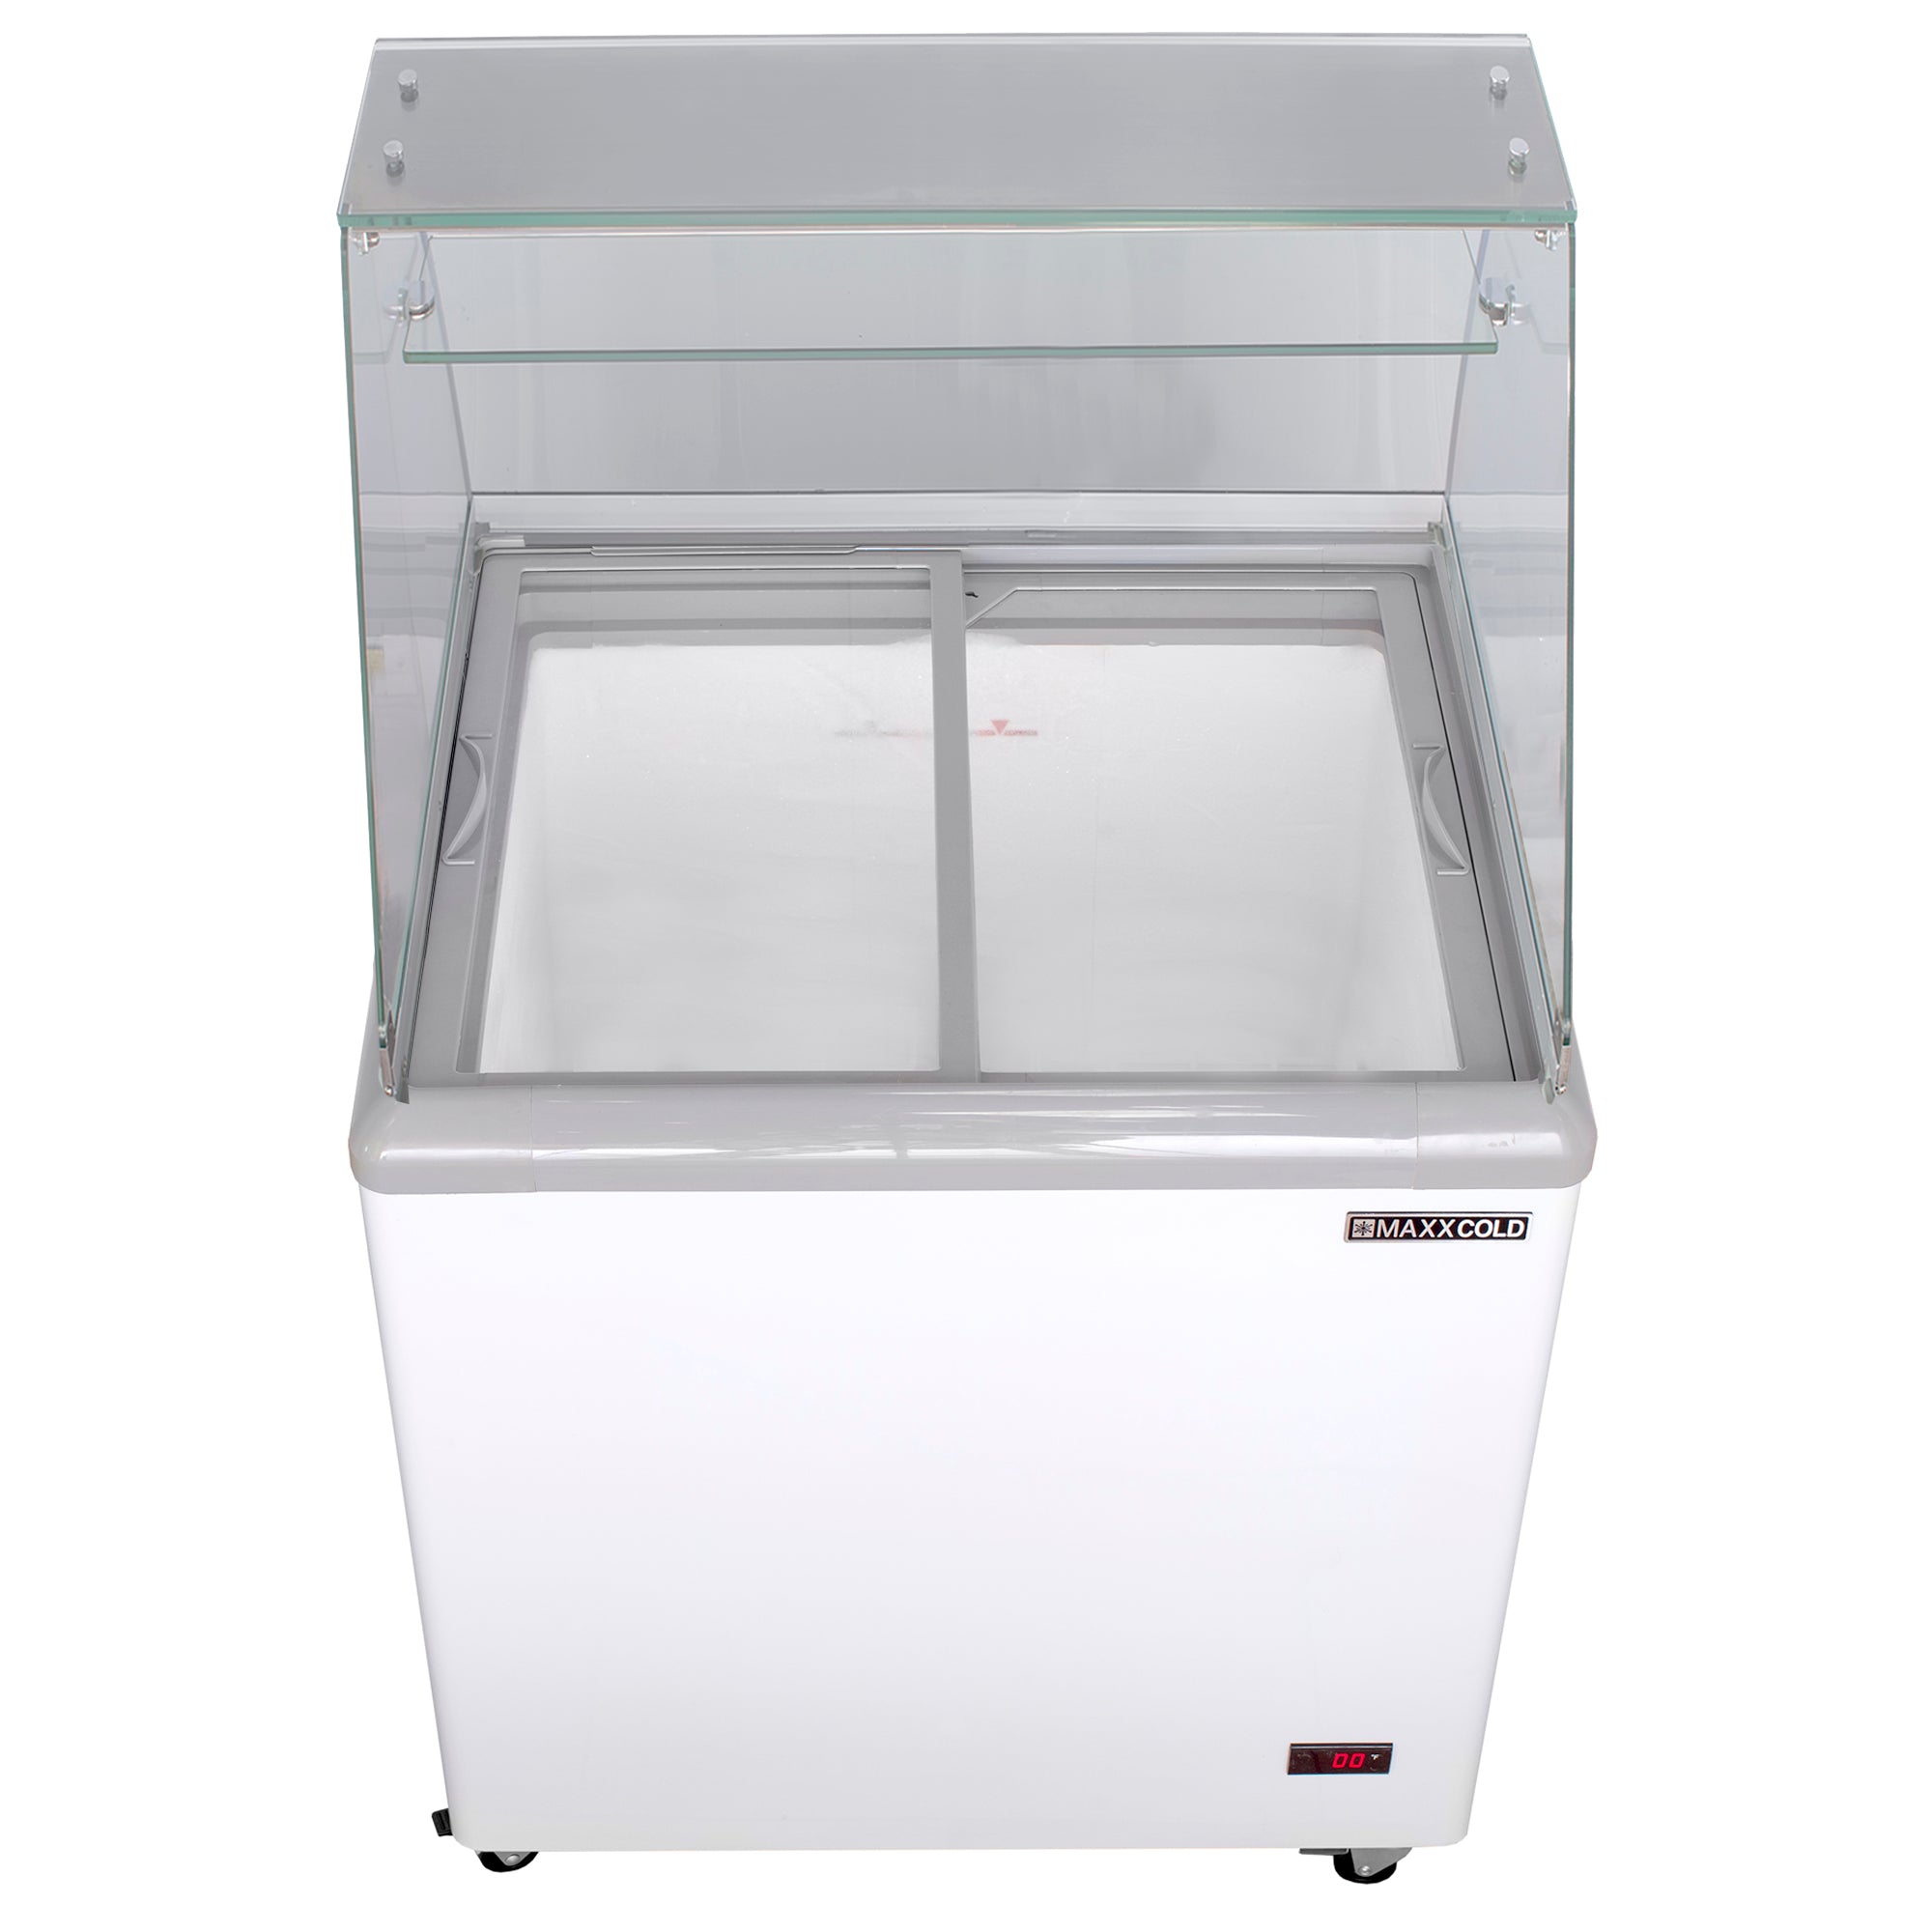 Maxx Cold - MXDC-4, Maxx Cold Curved Glass Ice Cream Dipping Cabinet Freezer, 31.5"W,  5.8 cu. ft. Storage Capacity, Holds up to (12) Flavor Tubs, in White